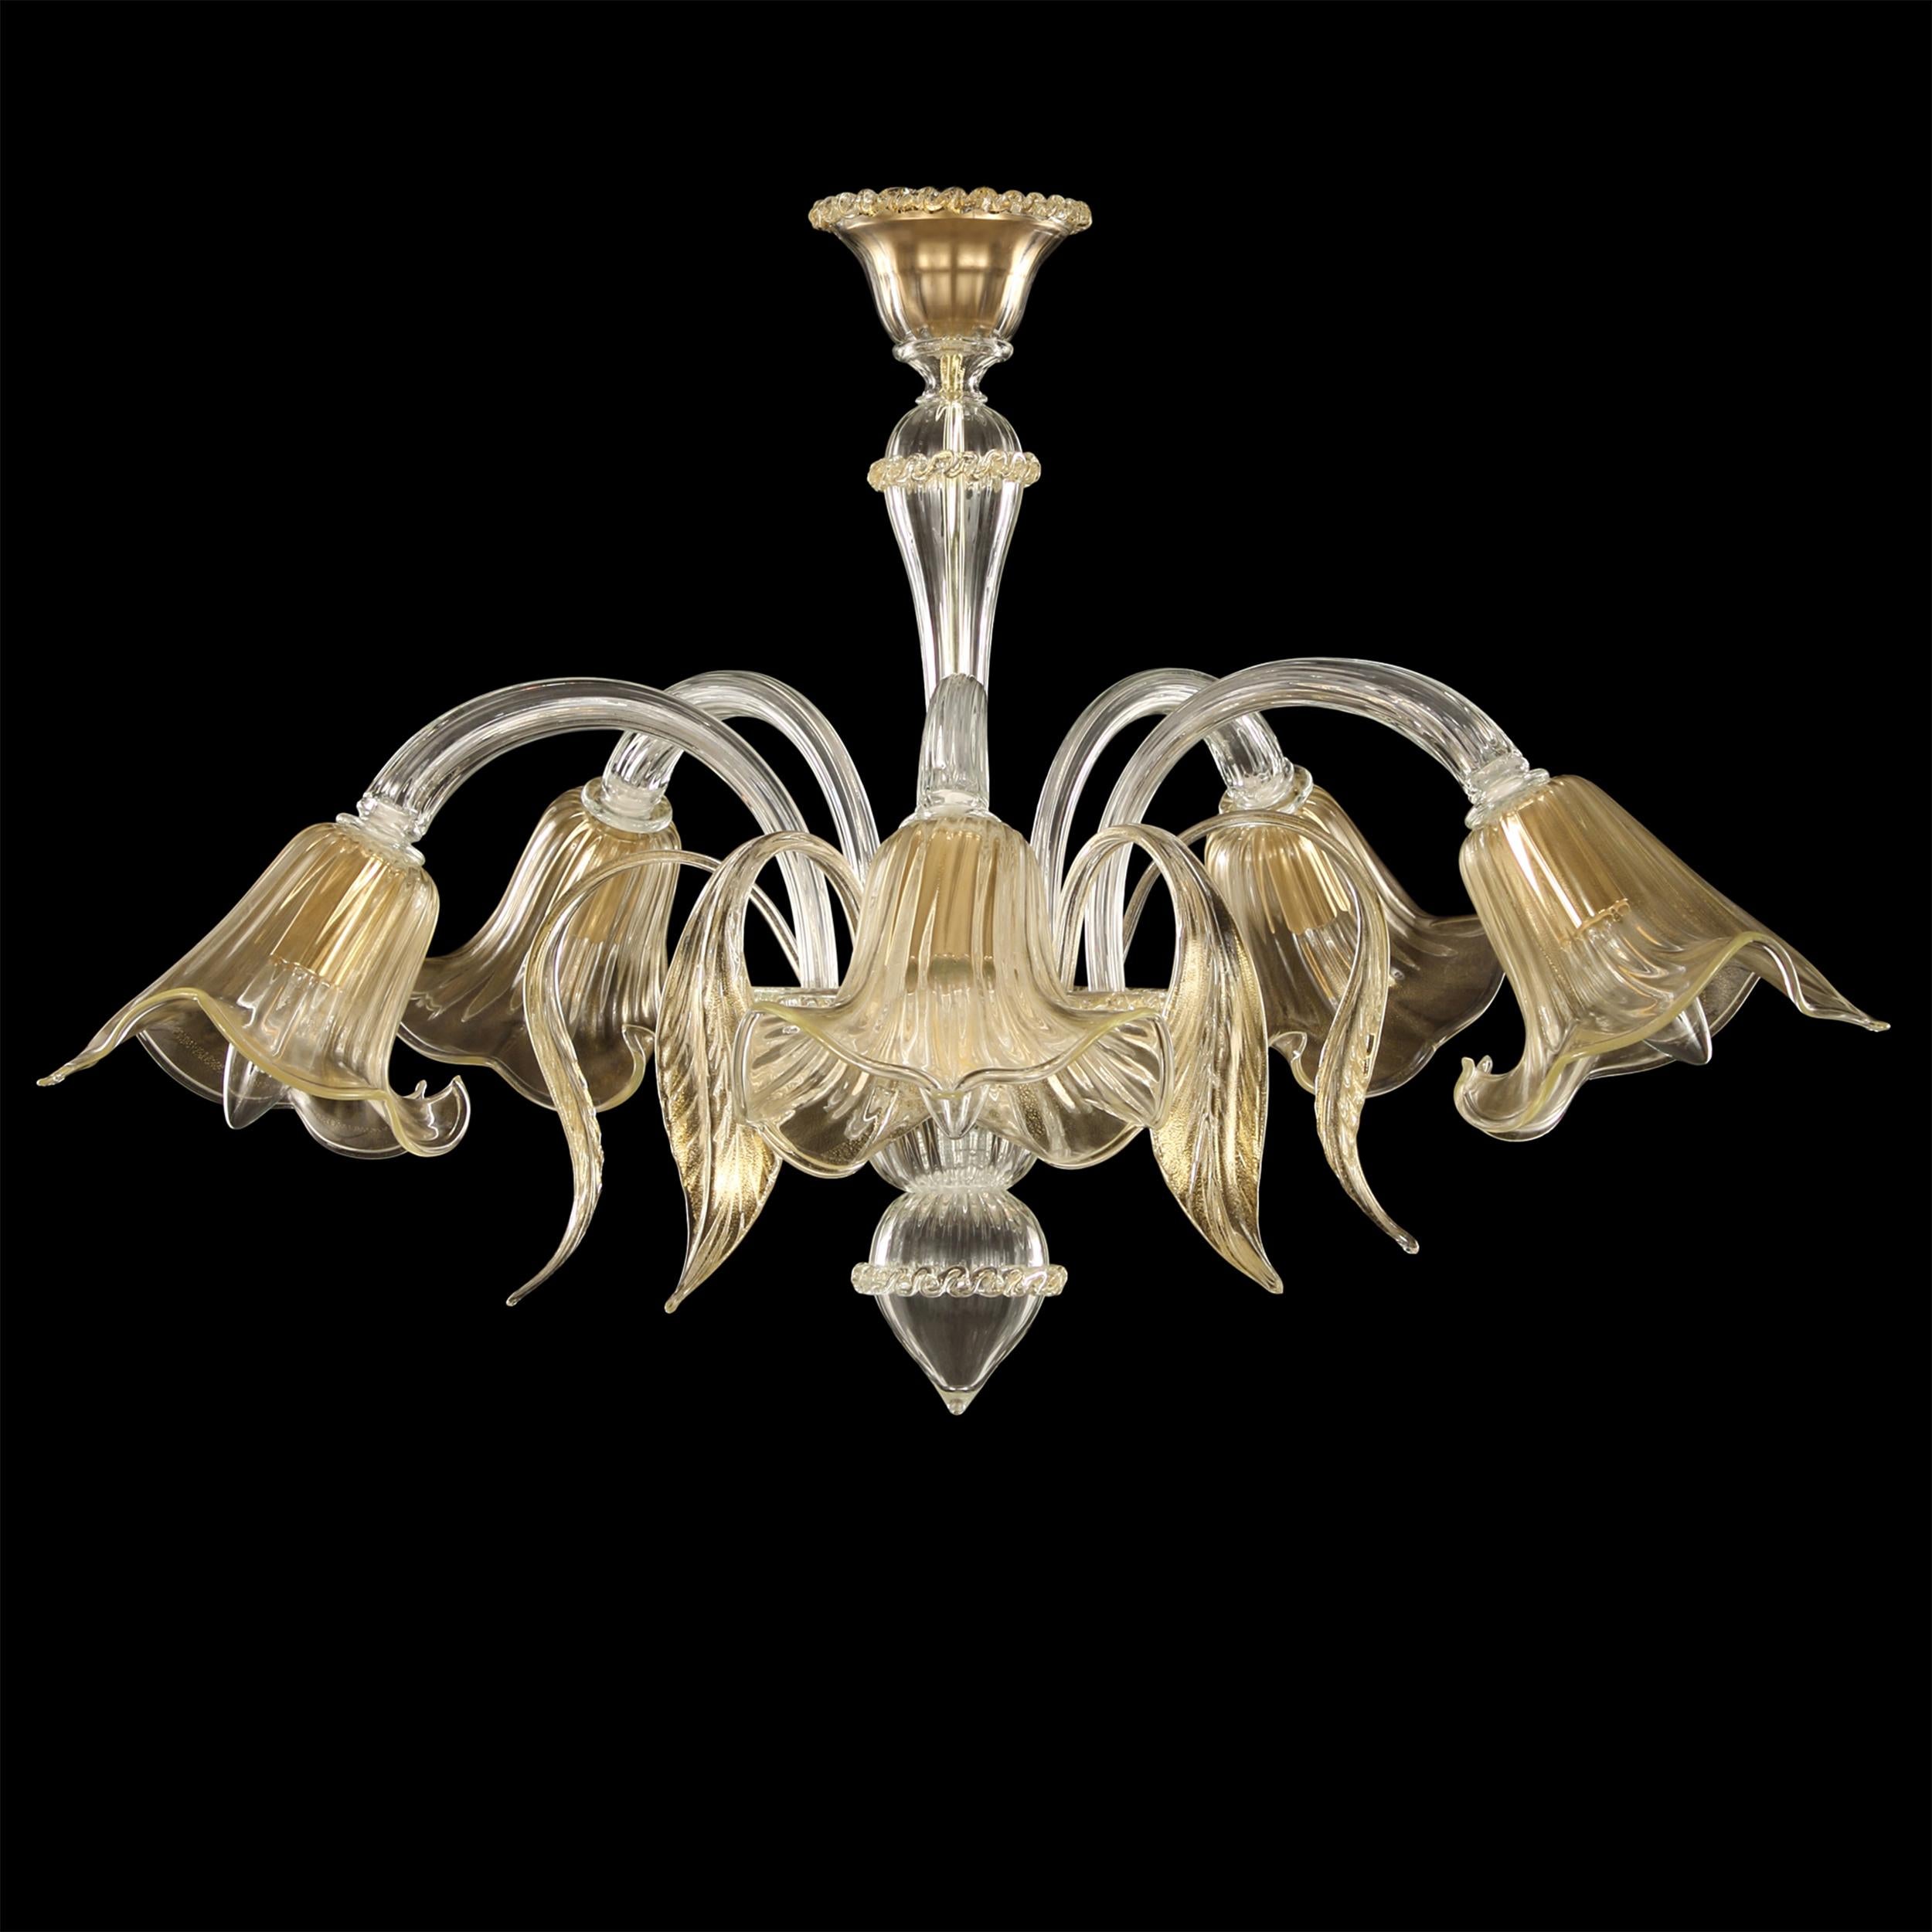 Artistic chandelier 5 arms, clear and gold Murano glass.
The venetian chandelier Accadueo presents an organic design, which is the result of an inspiration taken from the nature. The cups and some details remind the fluid flow of the water, a vital